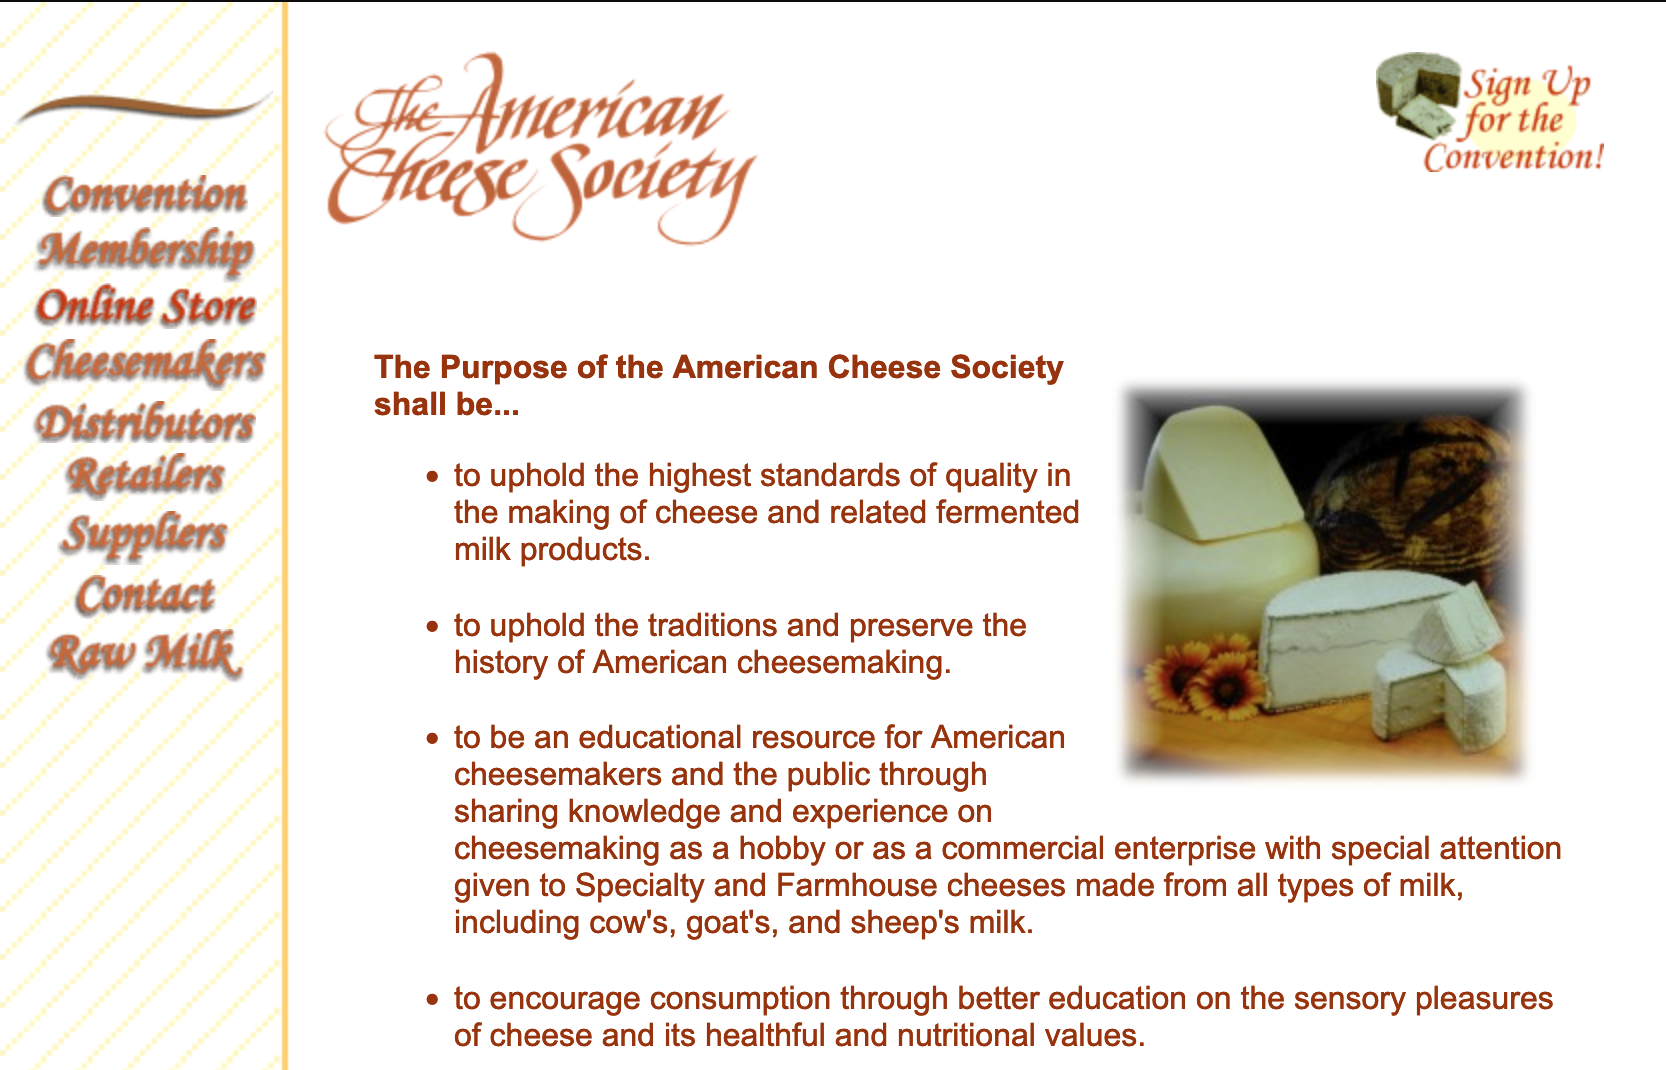 The American Cheese Society www.cheesesociety.org (2000/07/07)